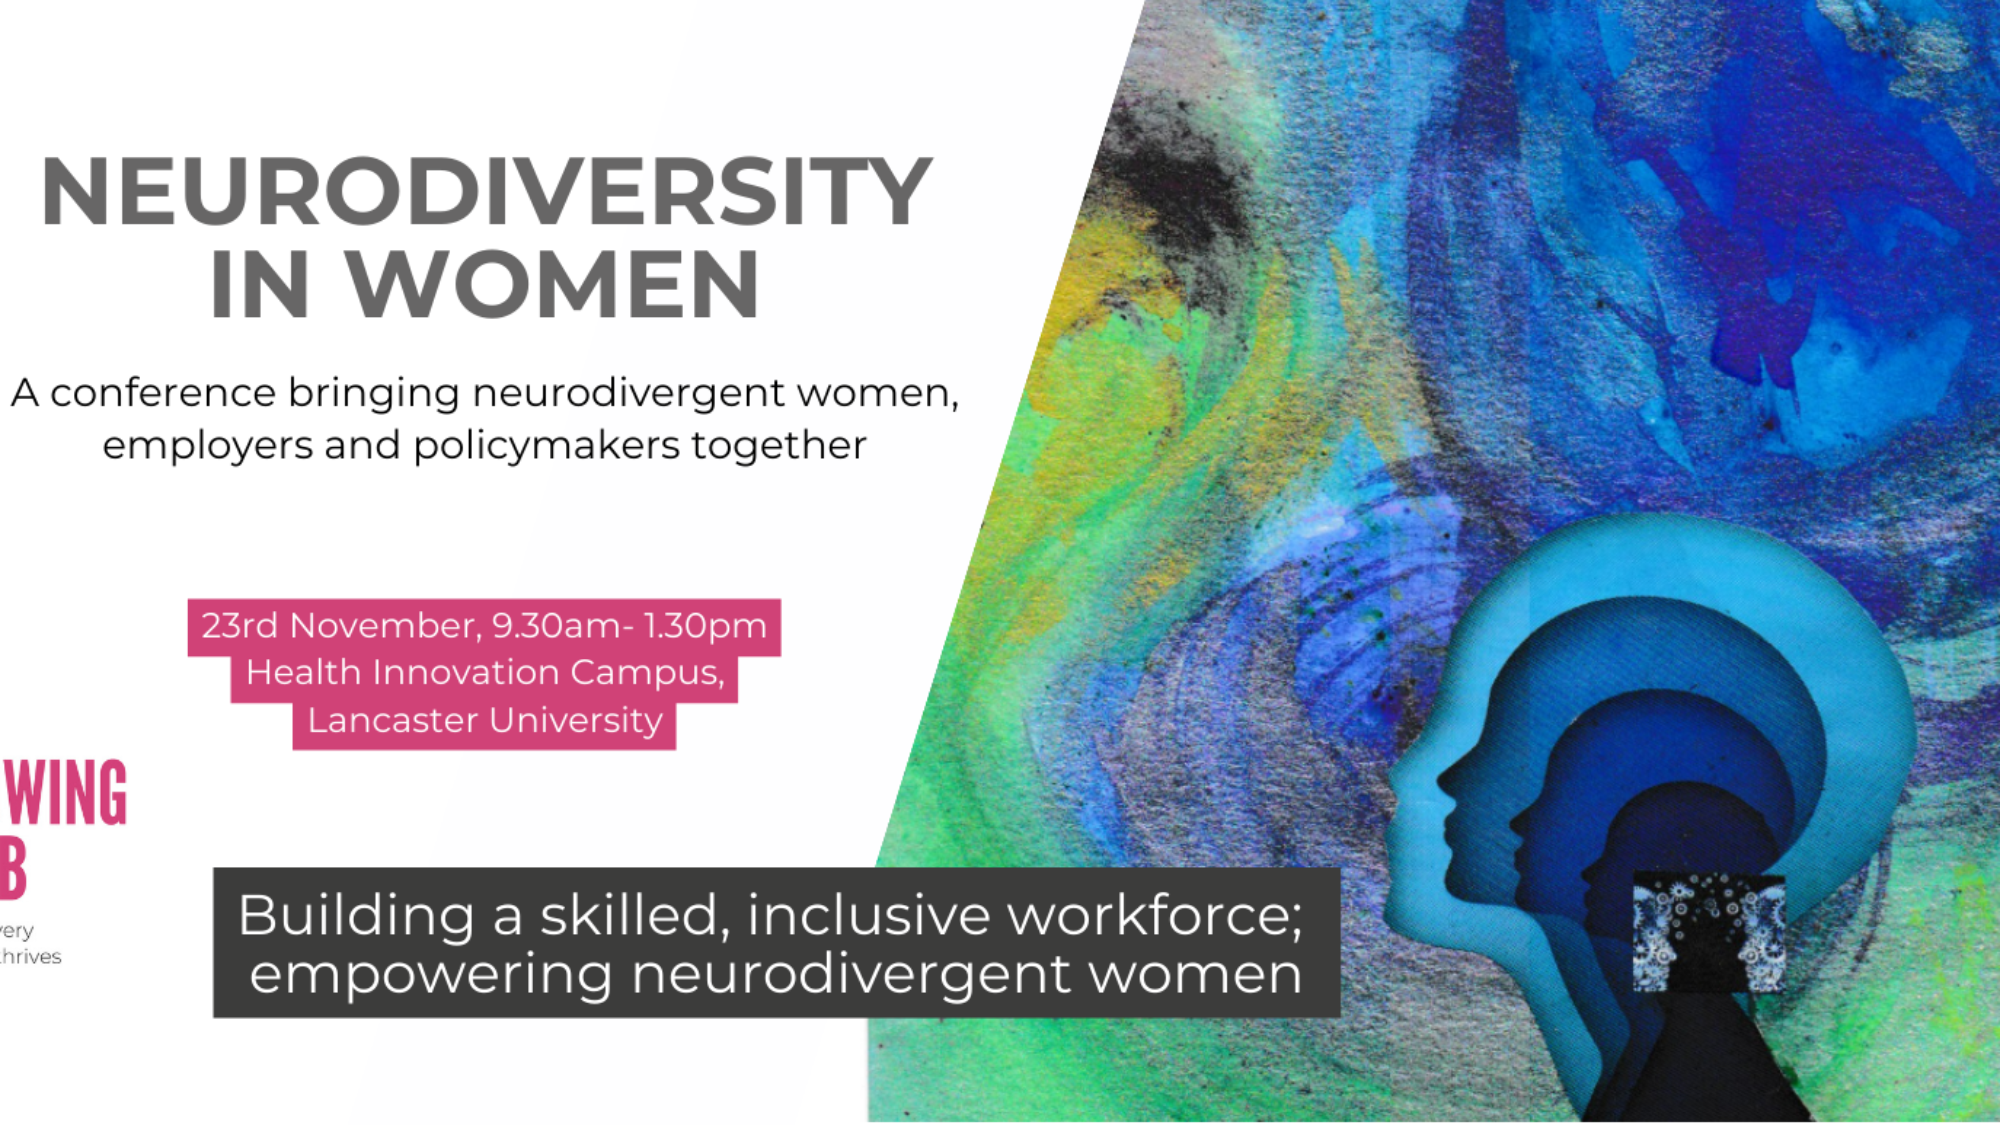 Empowering Neurodivergent Women in the Workplace - A Conference